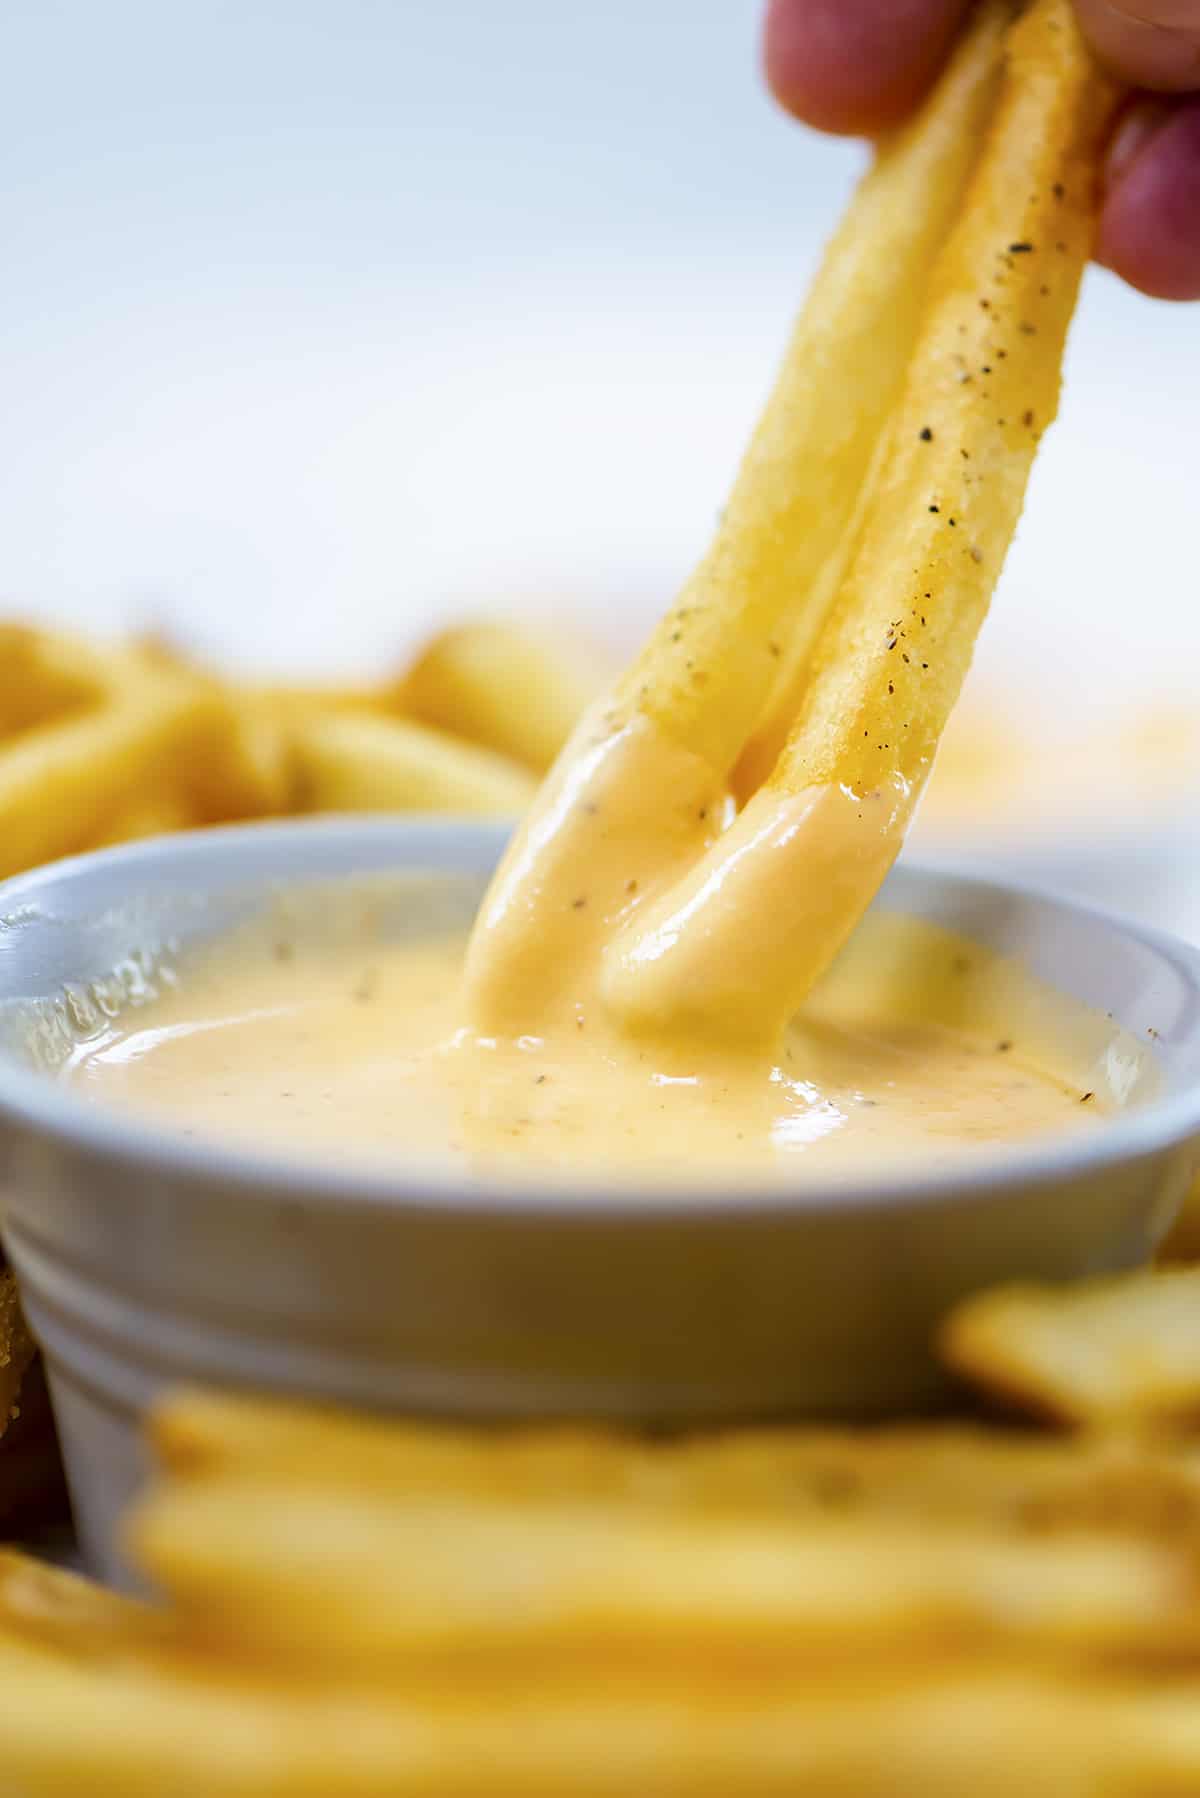 French fries being dipped in homemade cheese sauce.